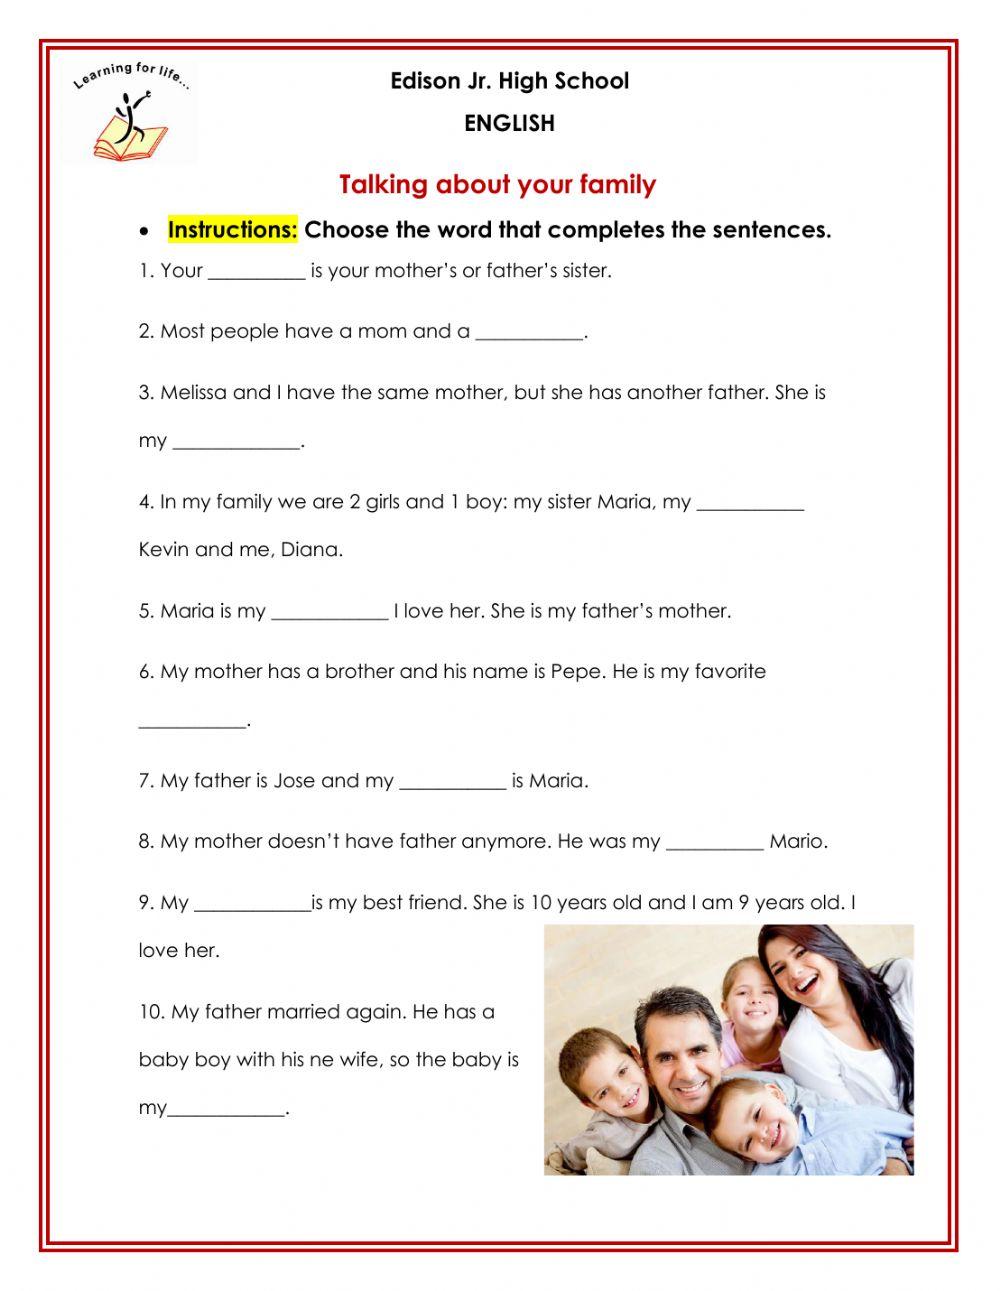 Talking about your family